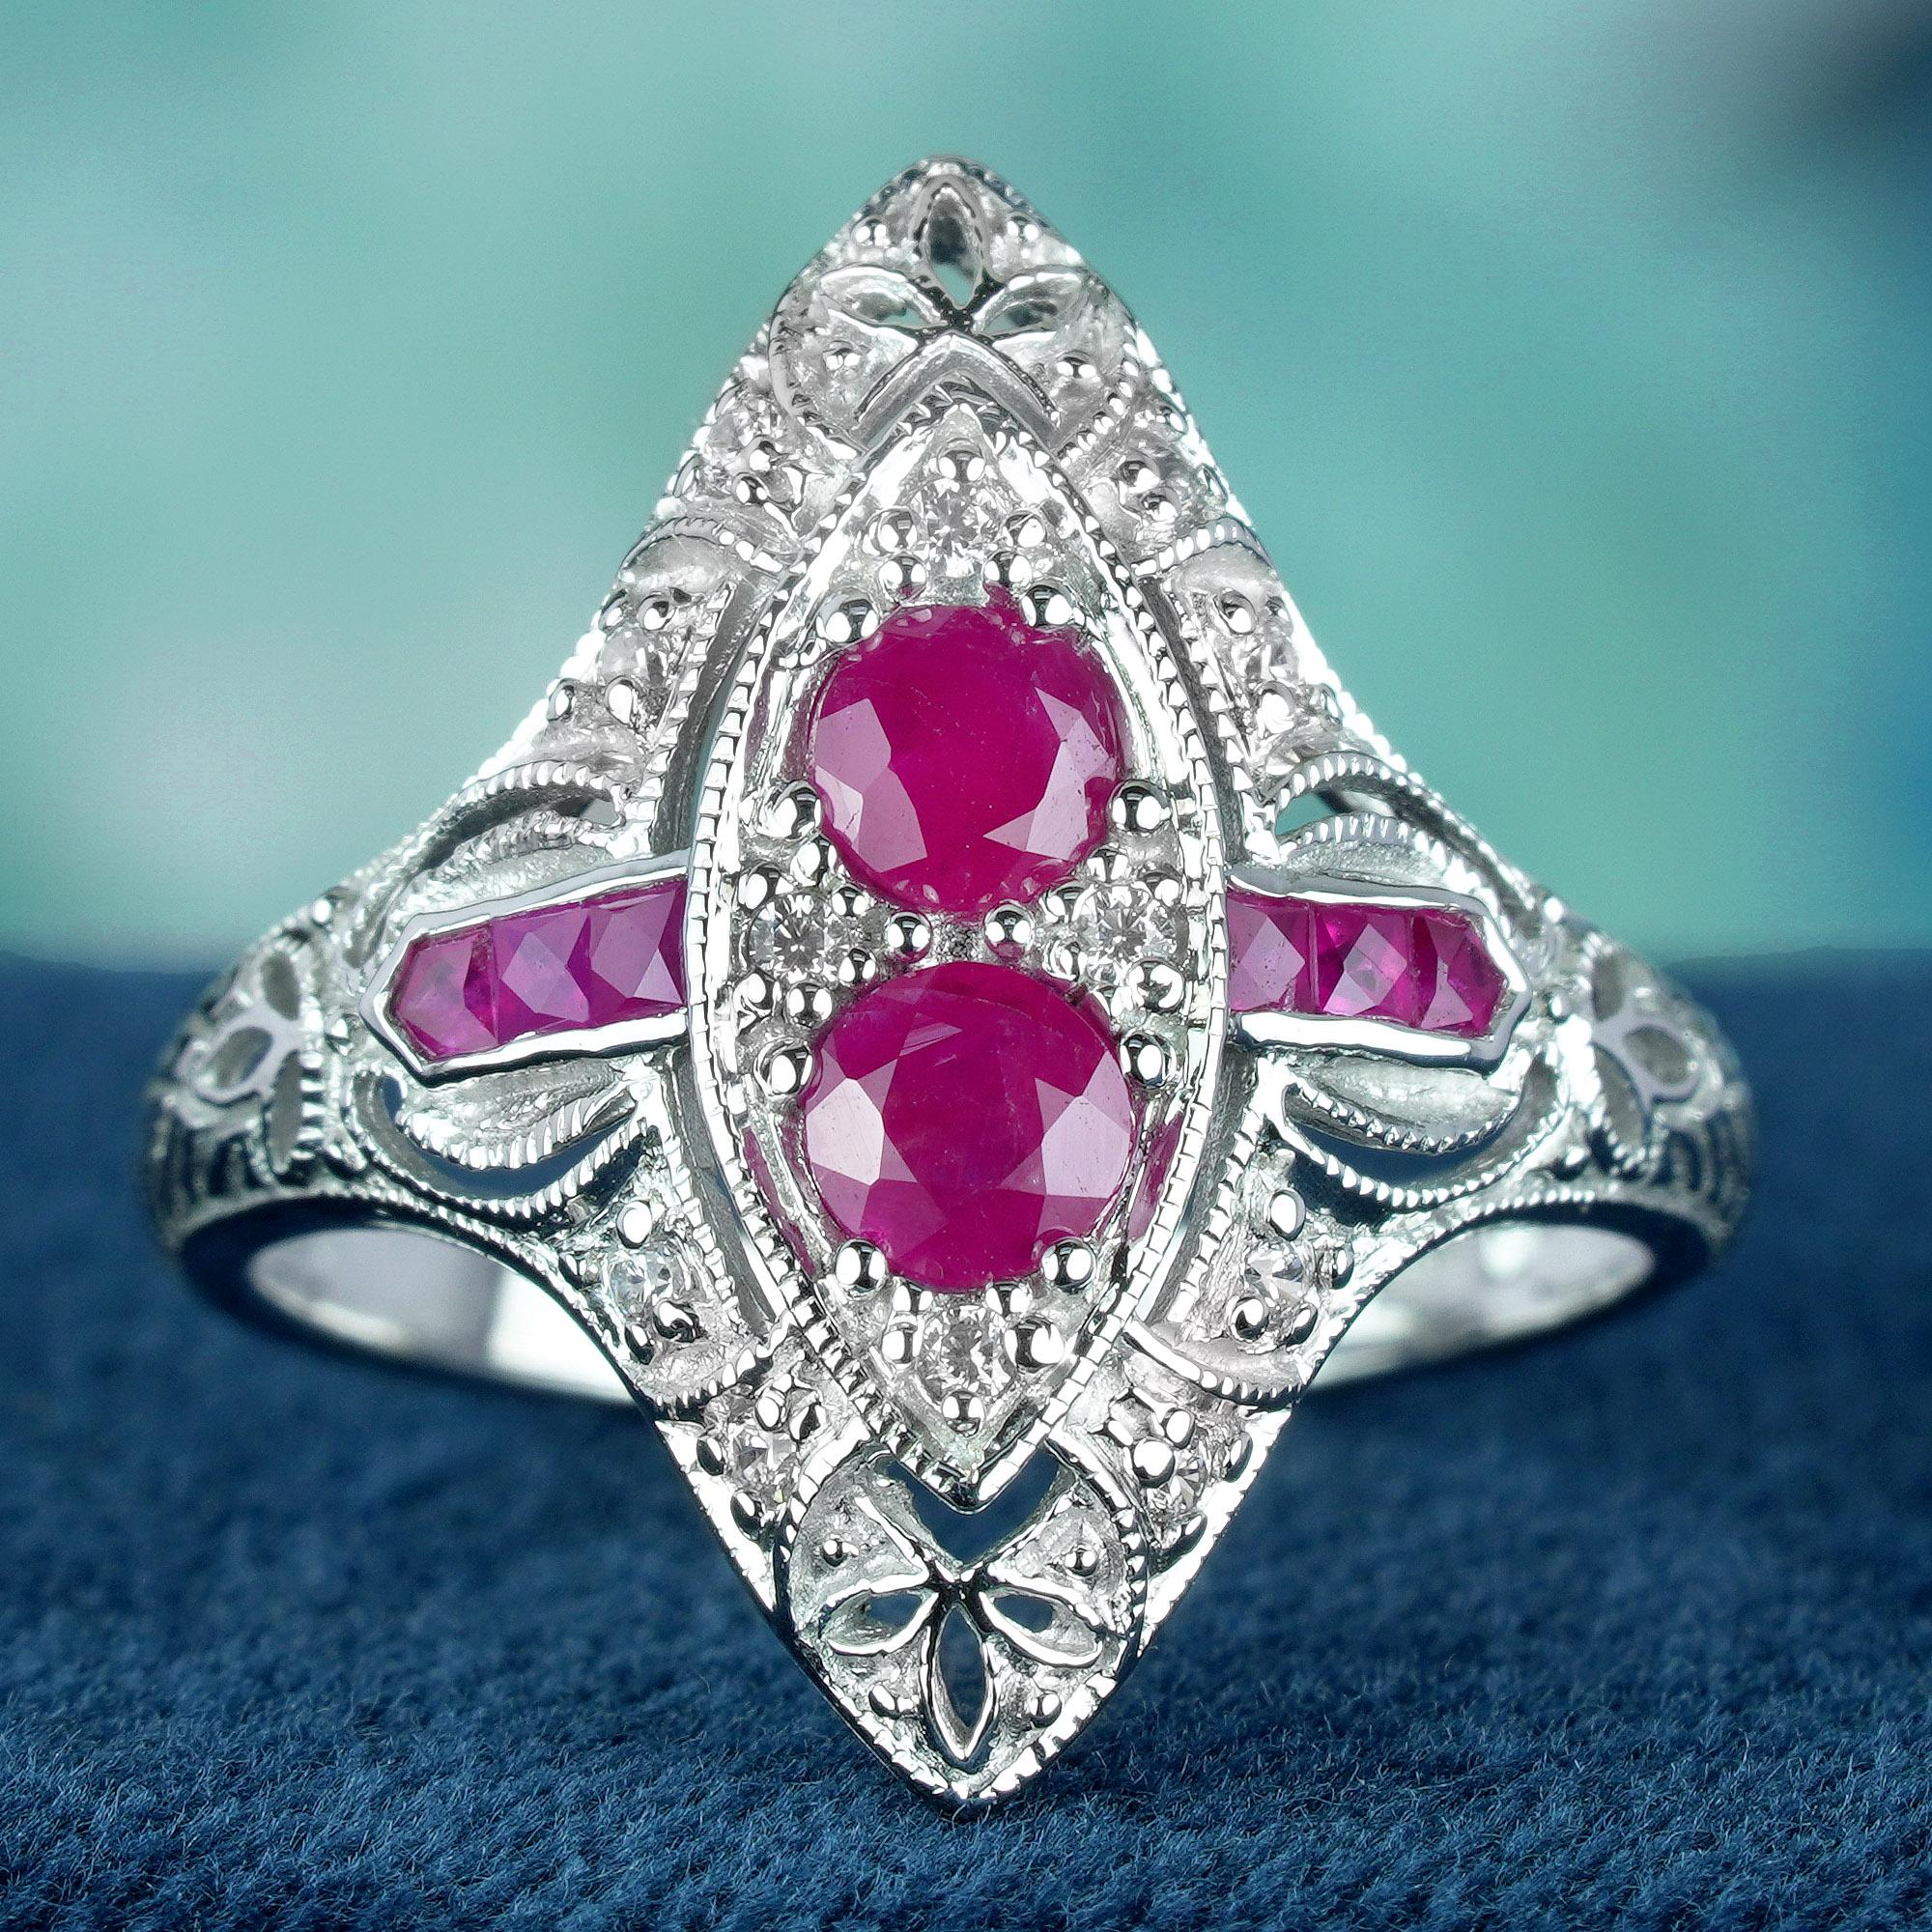 This stunning ring epitomizes the elegance of vintage Art Deco design, with two round ruby gemstones gracefully arranged at its centerpiece within a bead setting. Accompanying these rubies are smaller red French-cut ruby gemstones, meticulously